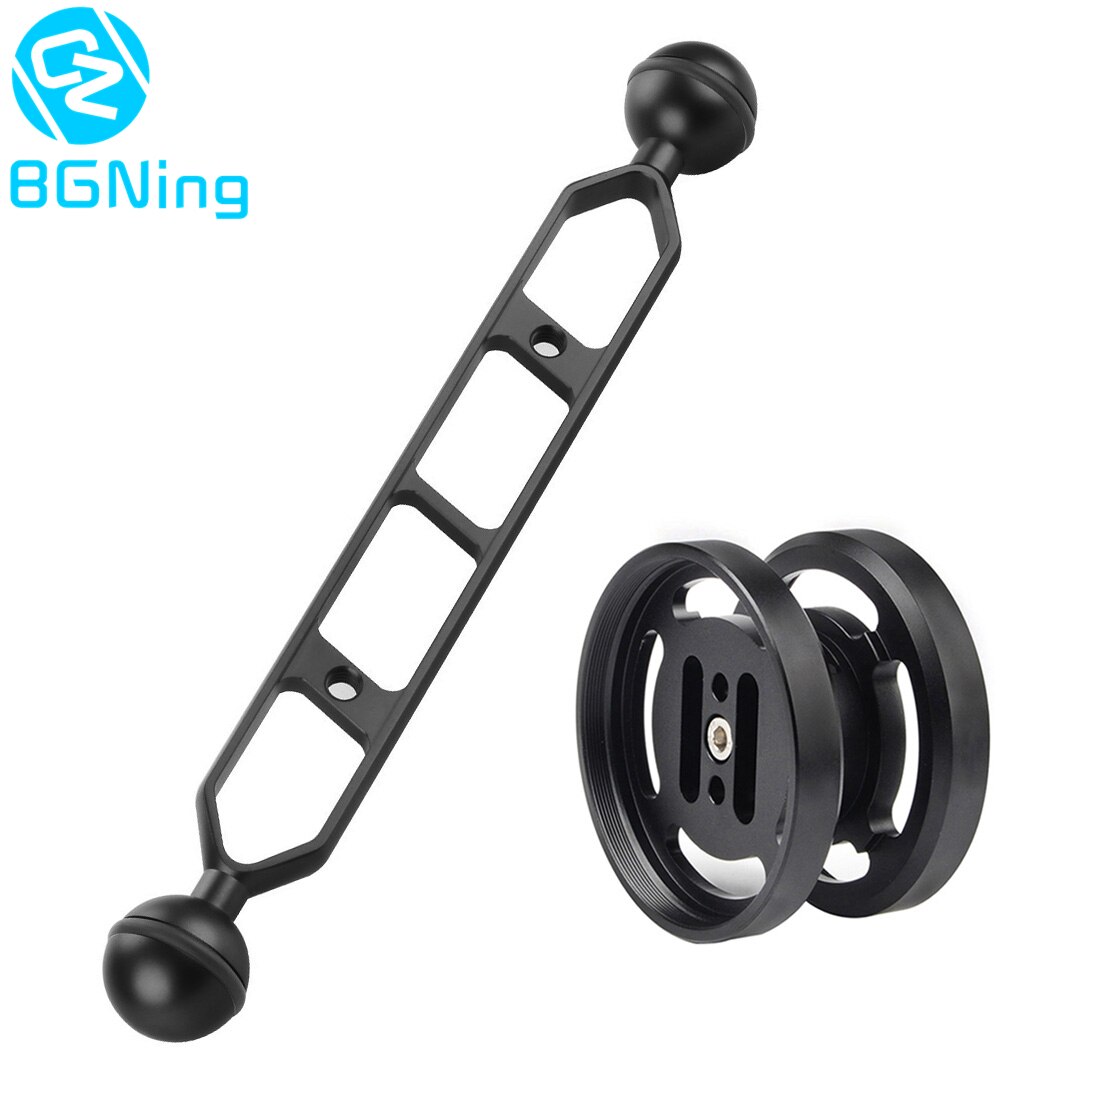 BGNing Aluminum Double 67mm Macro/Wide Angle Lens Stand Holder with 5/7/9/11inch Diving Floating Arm Underwater DSLR Camera Photography